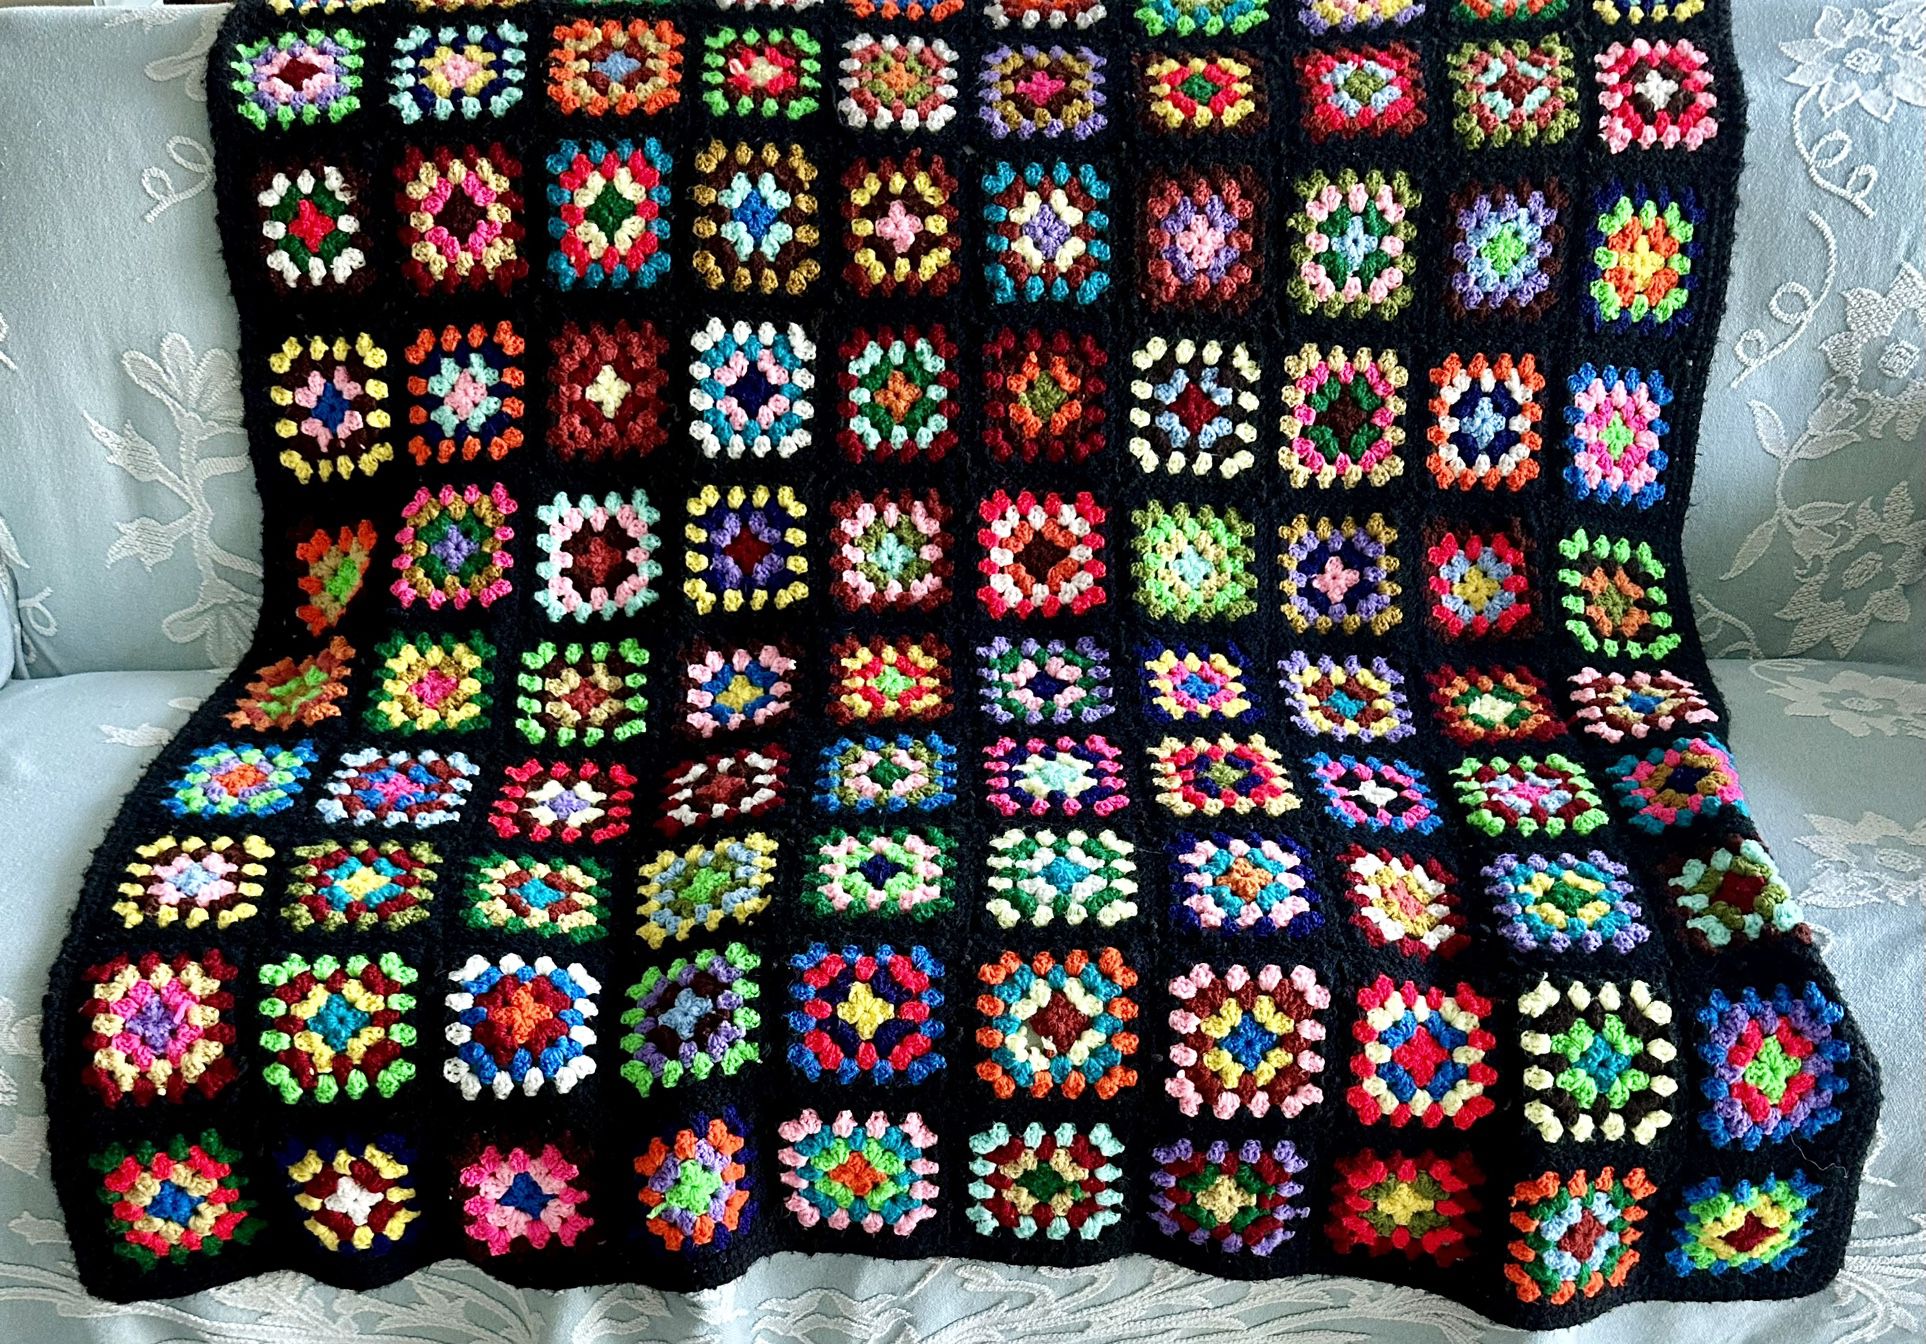 Vintage handmade crocheted groovy granny square afghan/blanket.  Nice large size at 79”x 54”. This one has ALL the colors. Background is black. 